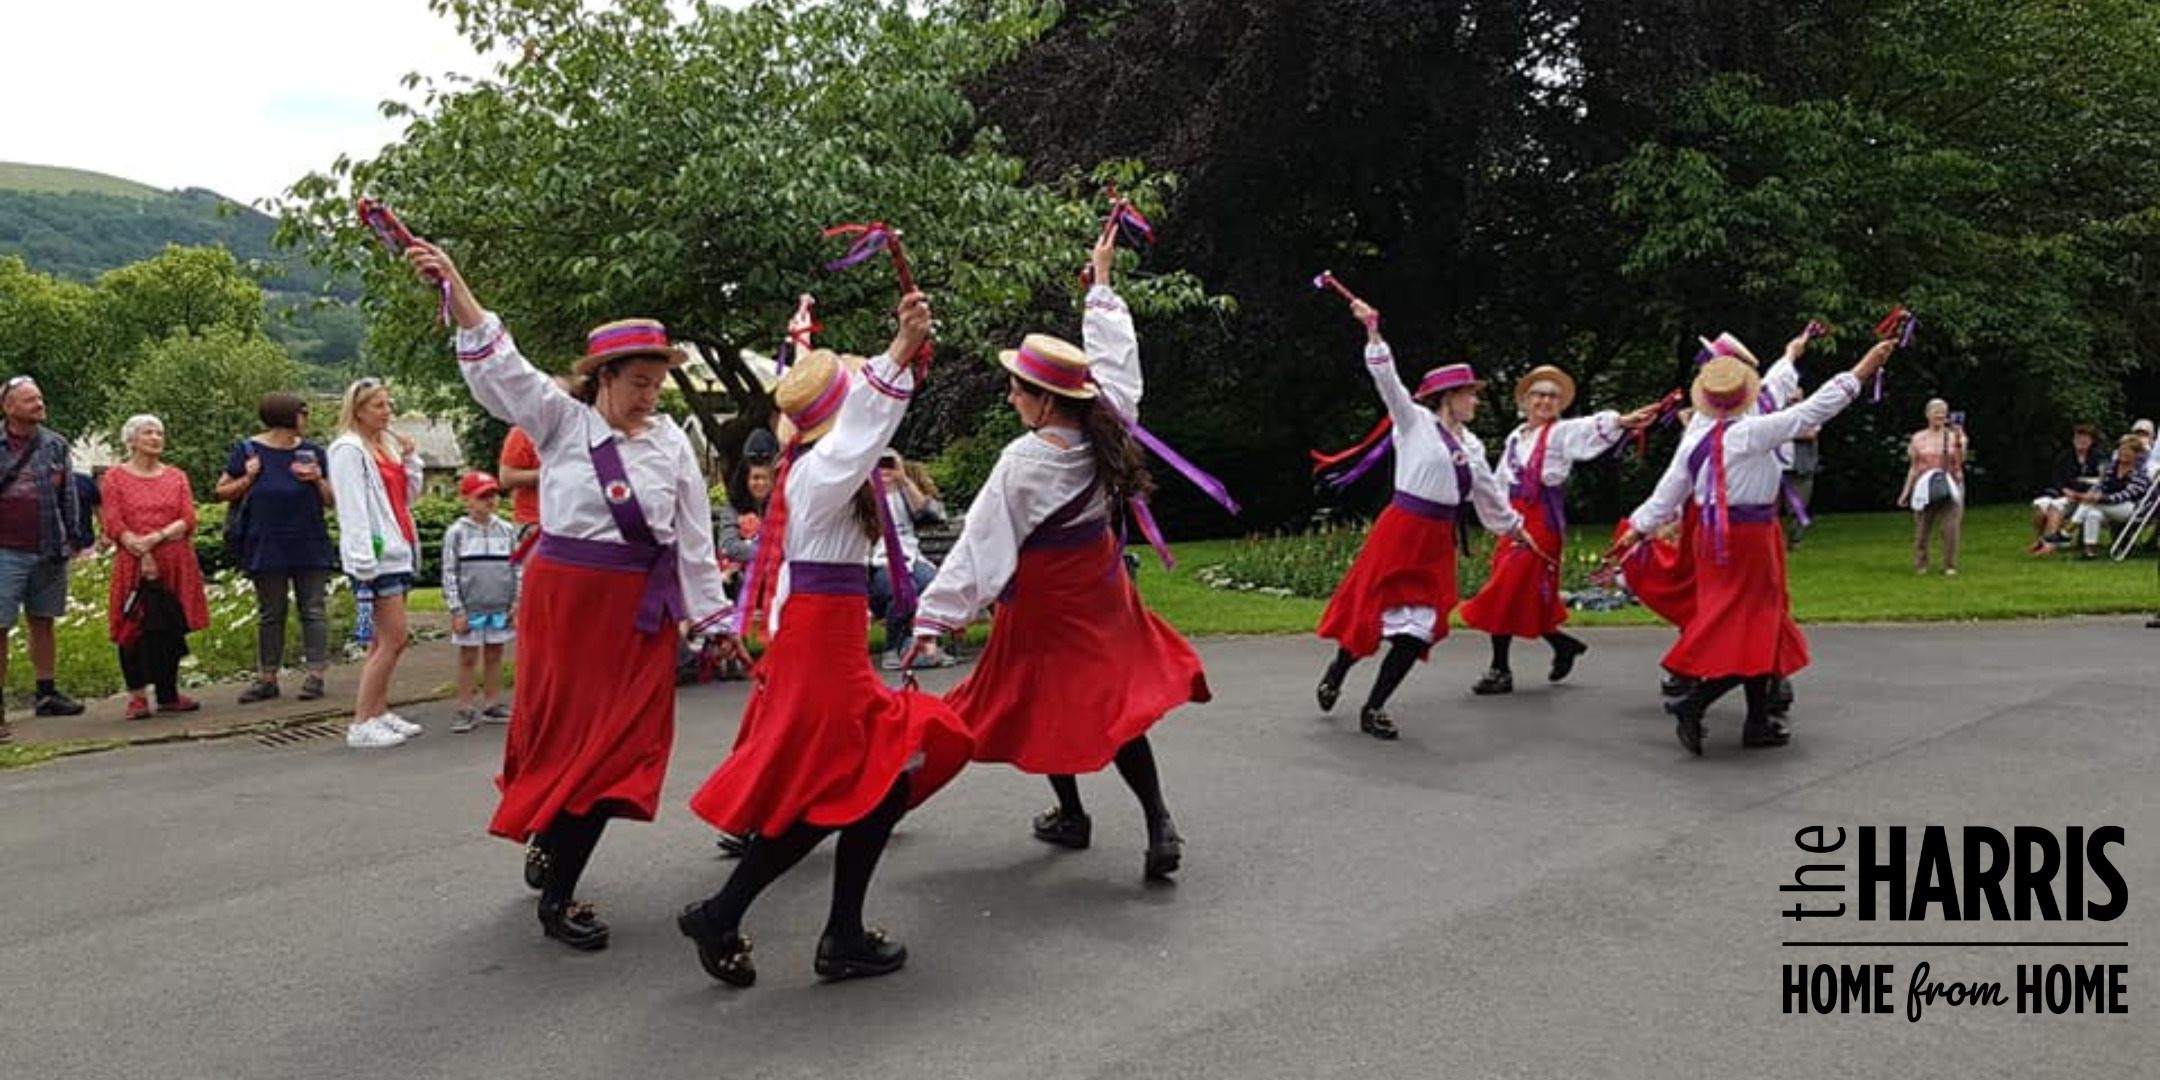 A group of people in red skirts dancing outside.